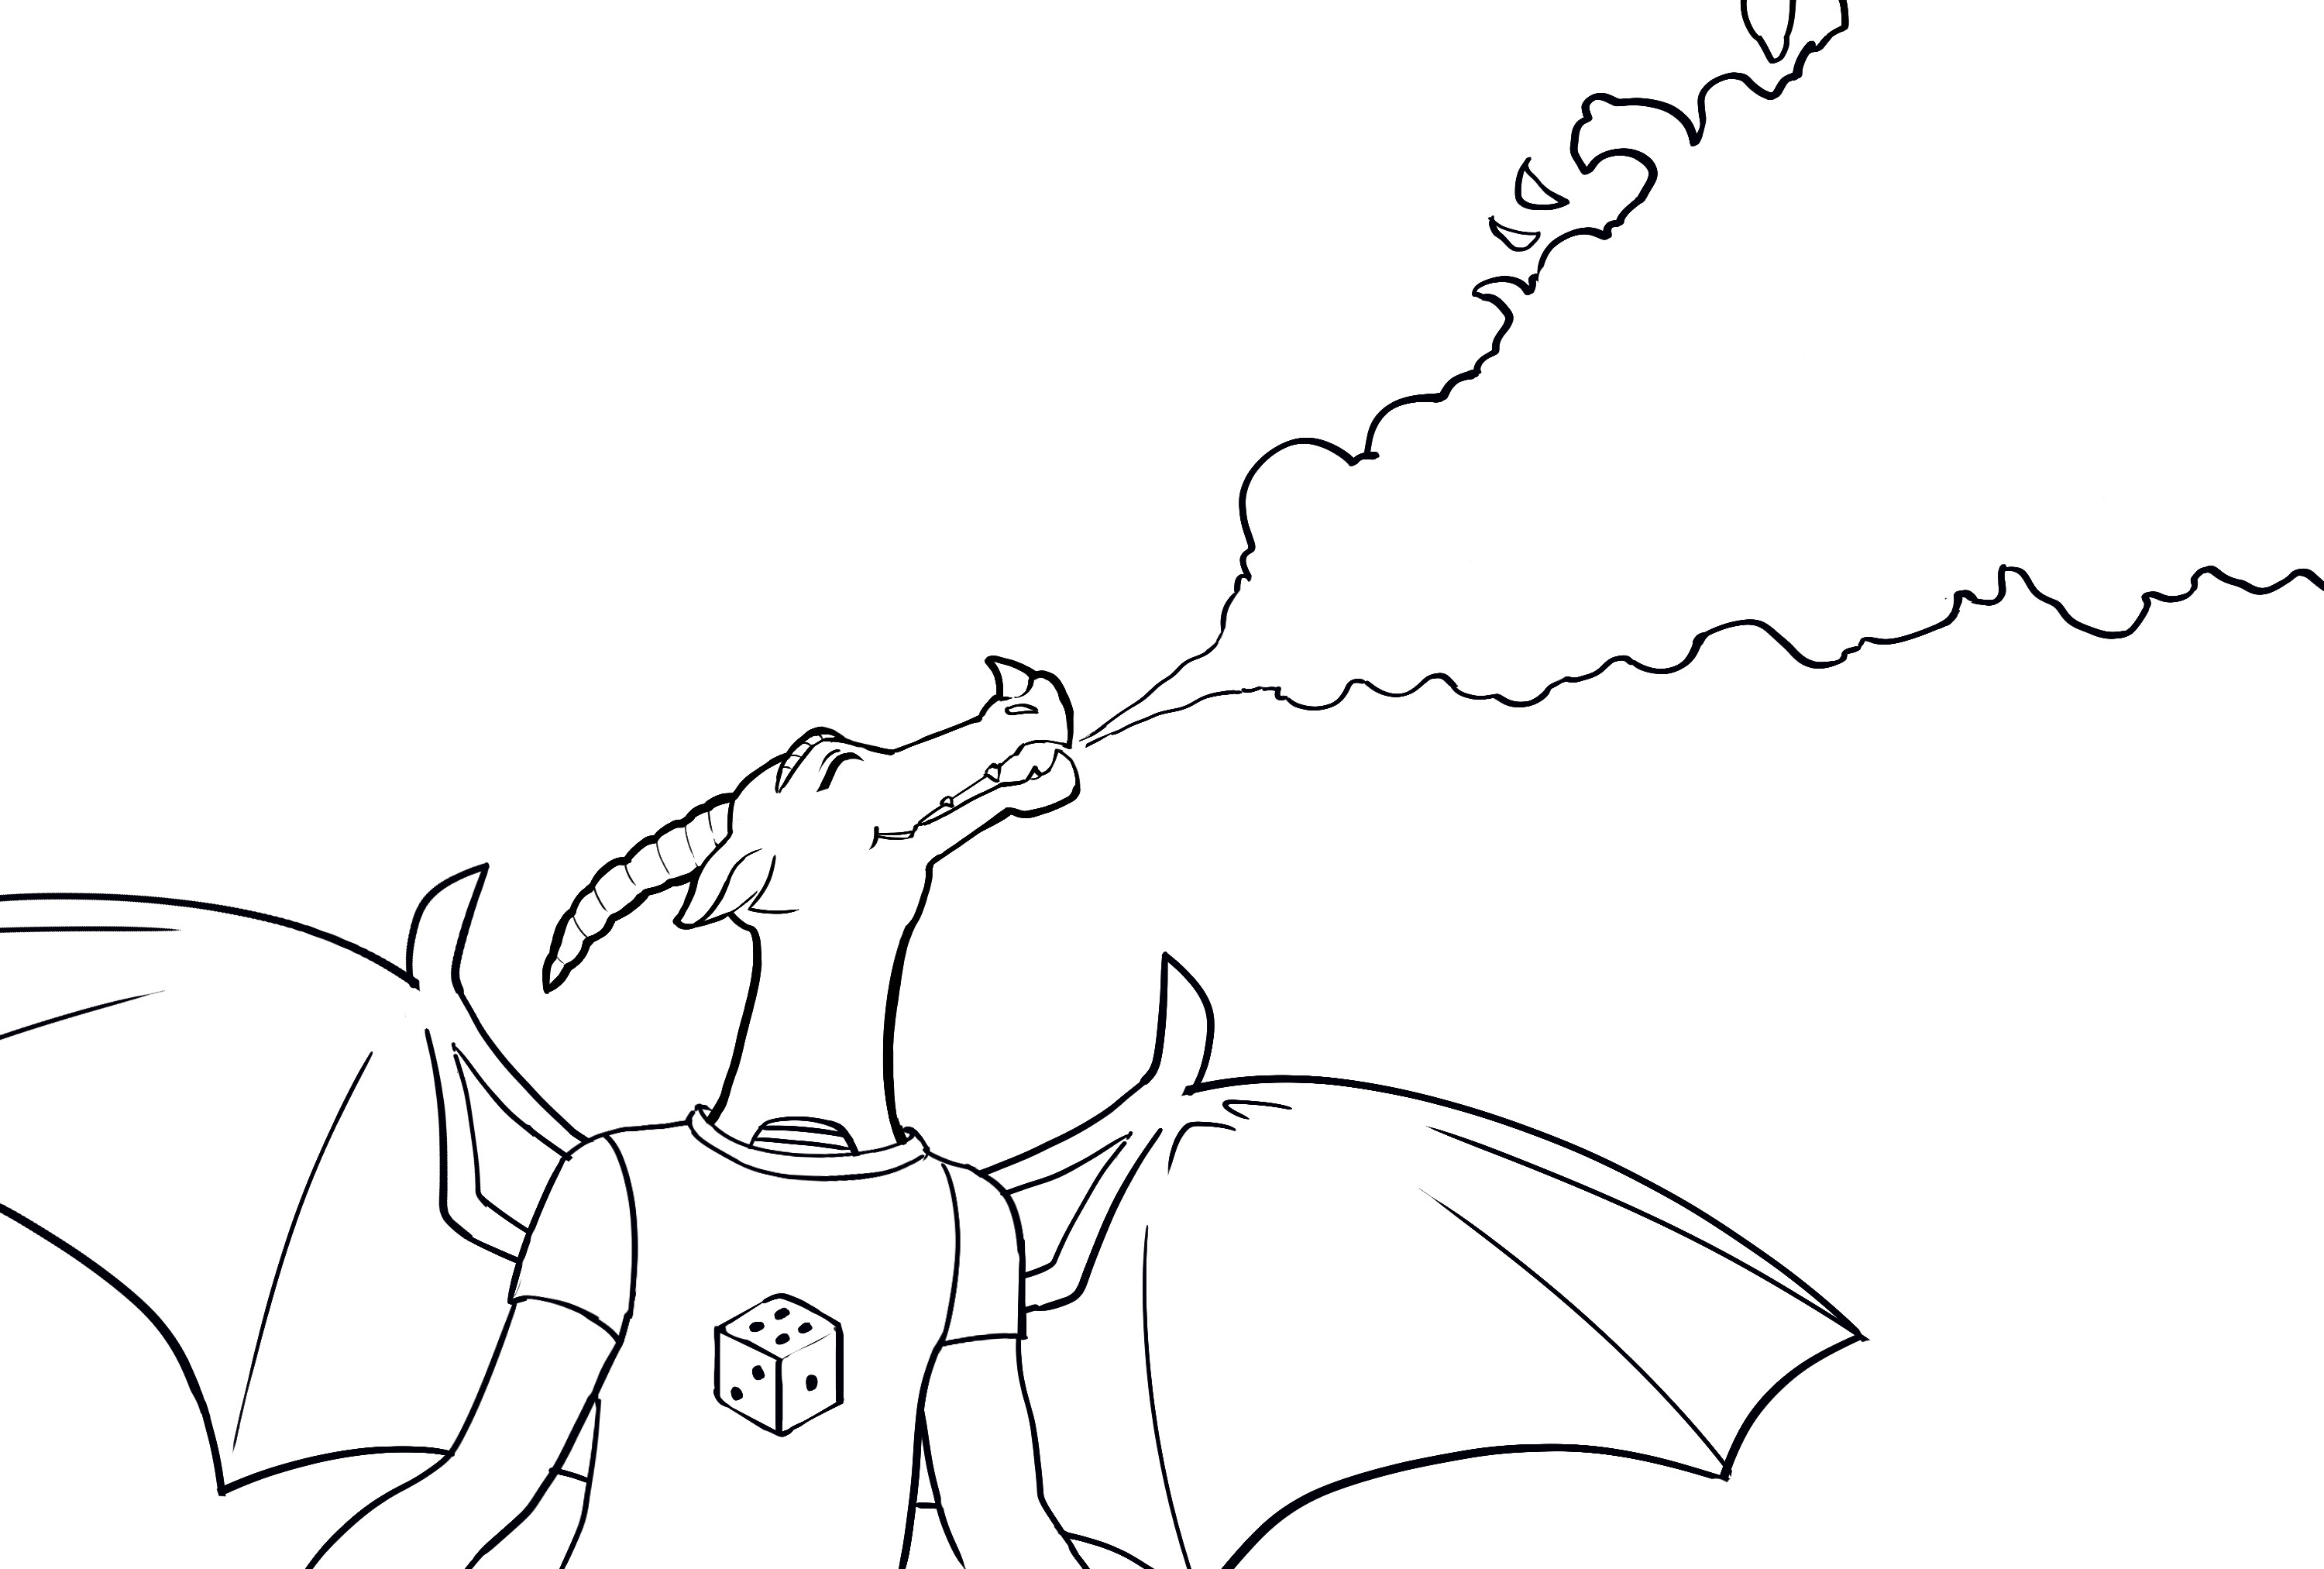 Here is the line-art of our dragon character Phil.